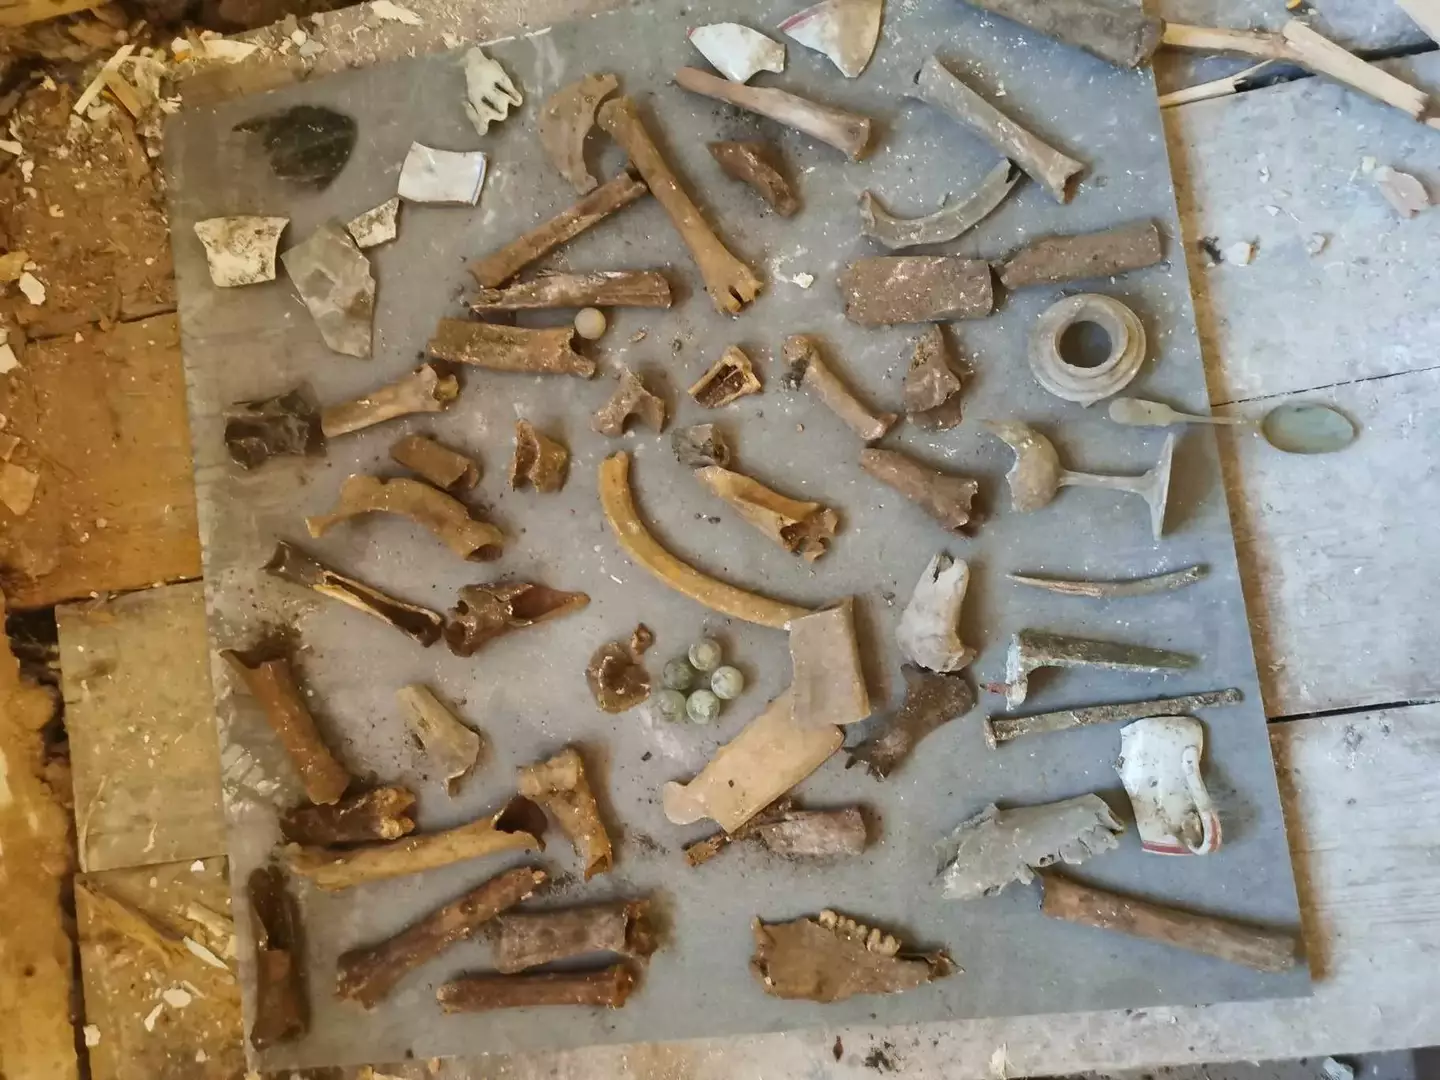 The plumber ended up finding 20 other bones.